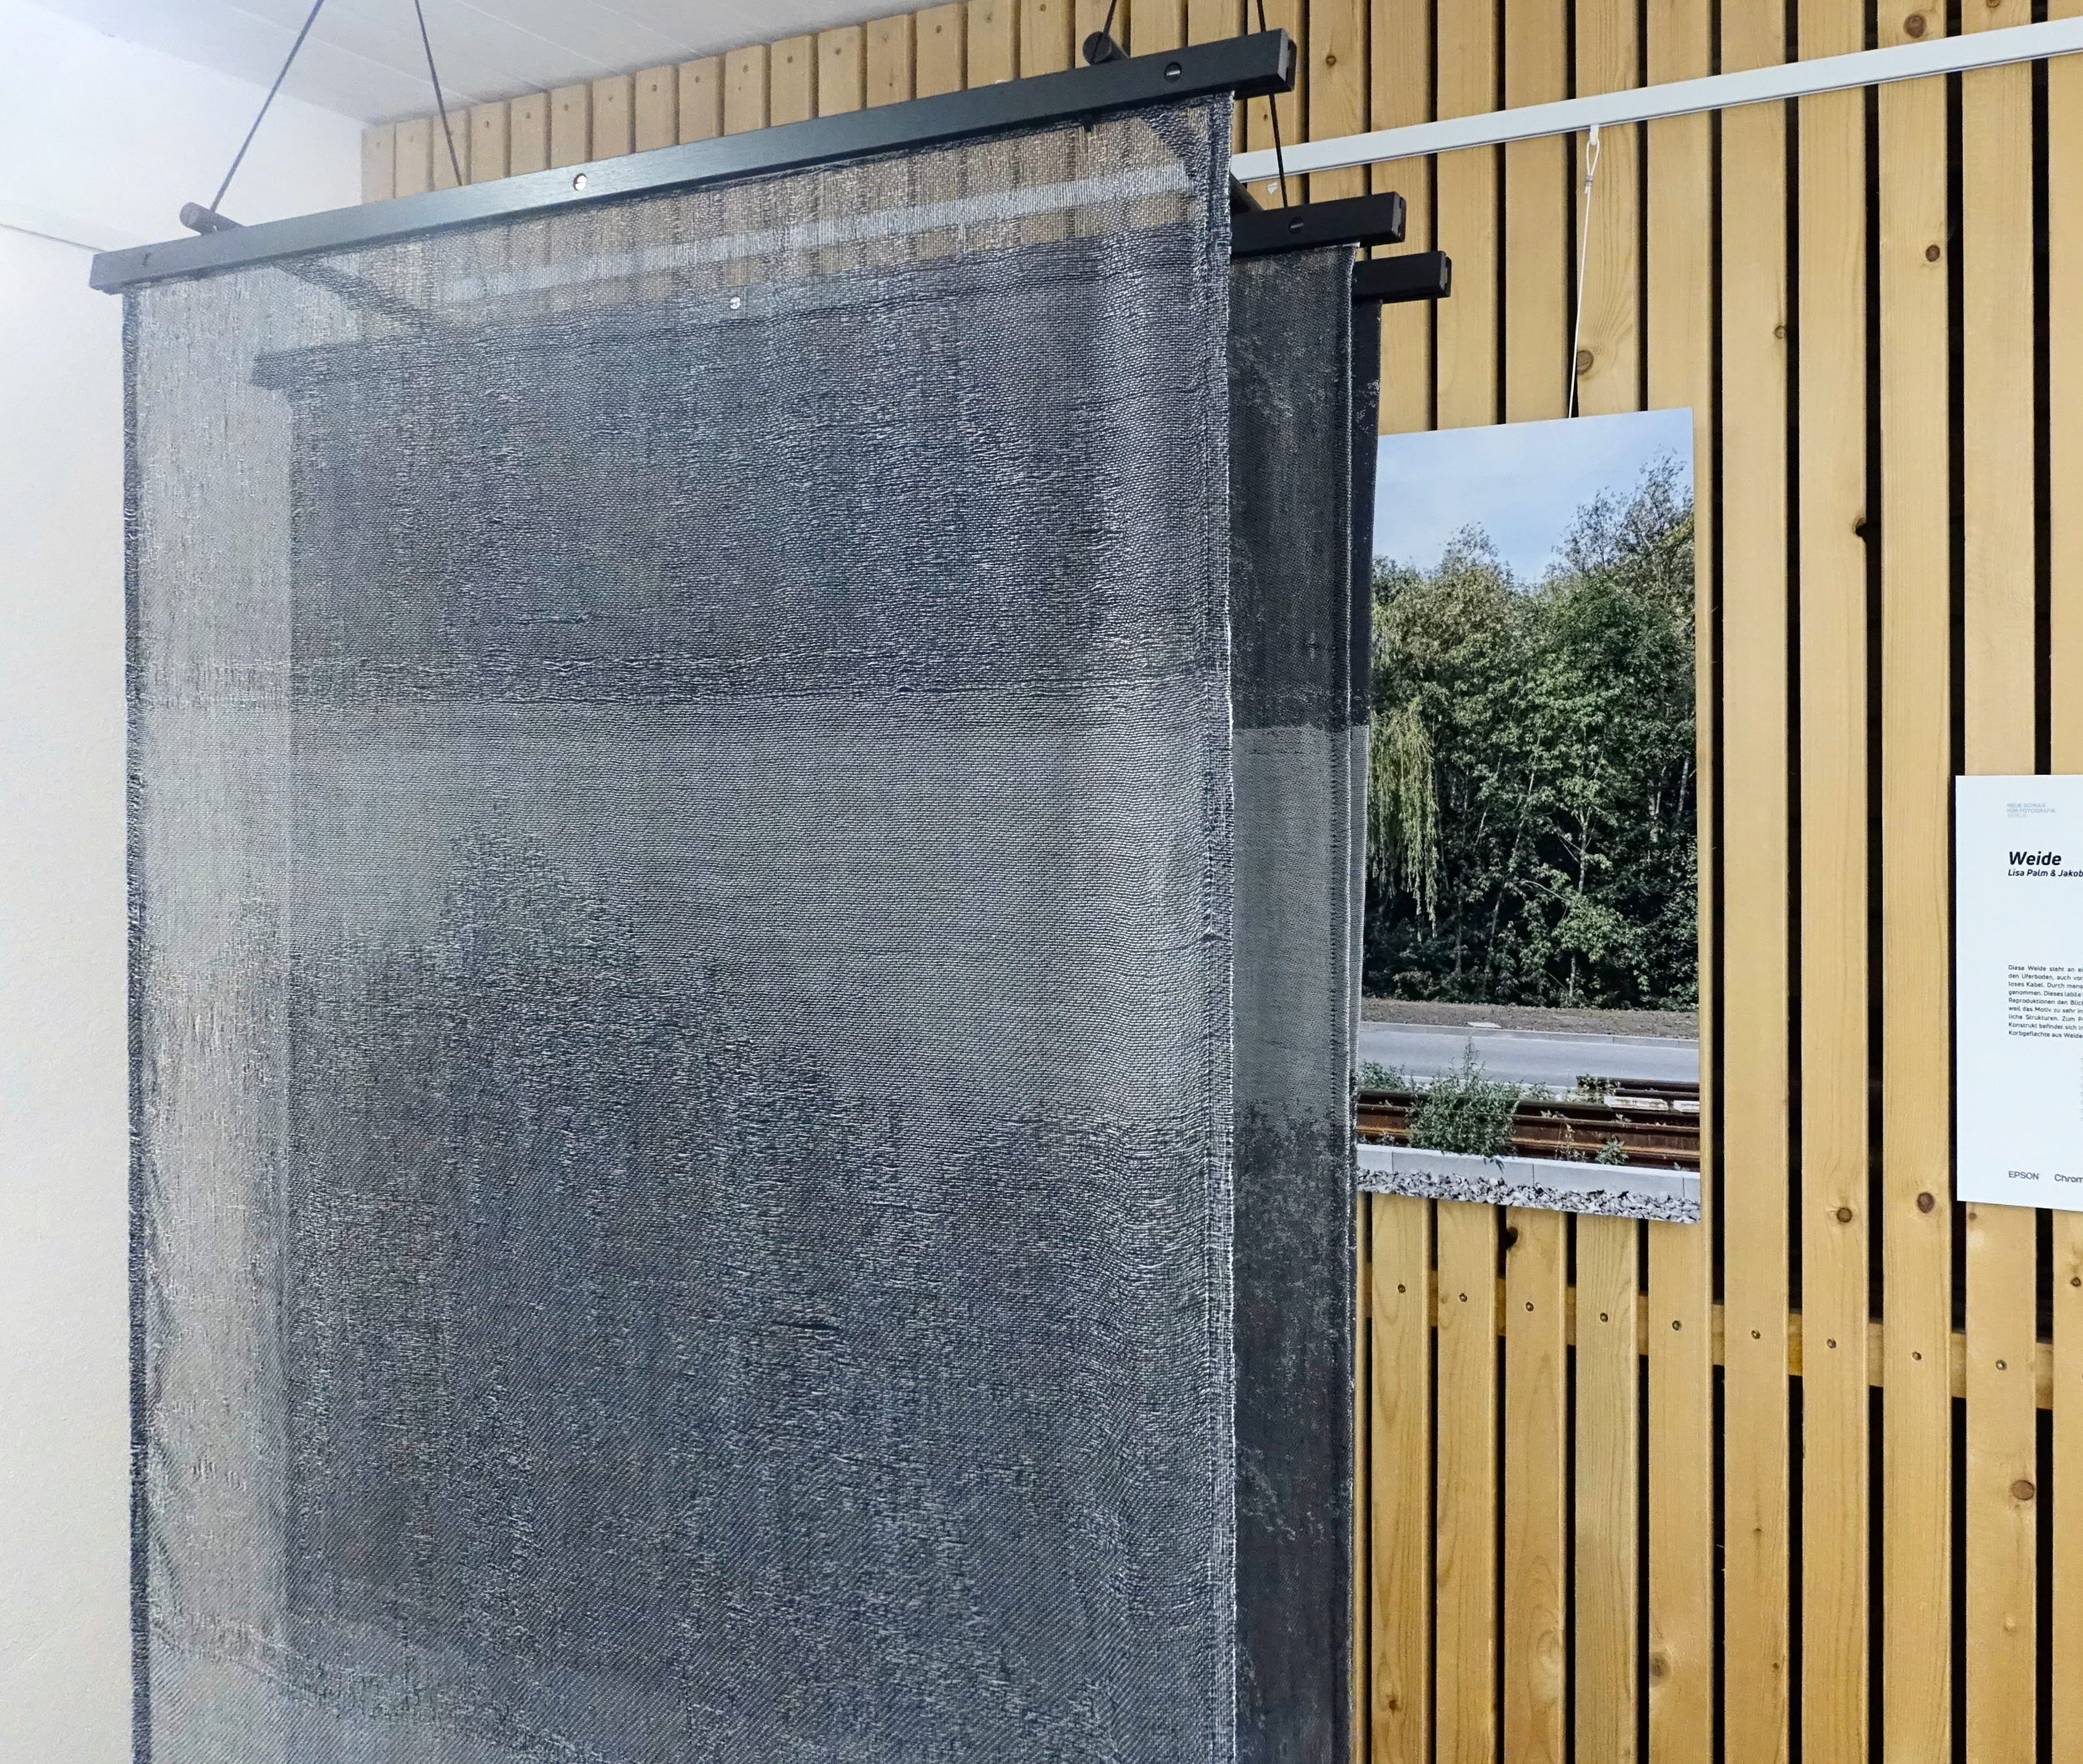 Three layers of black and white woven textiles, hanging vertically, parallely, in front of a glossy photograph on the wall. The wall looks like a sauna. On the photograph, we can see a willow tree, some sky, and road in front of it.